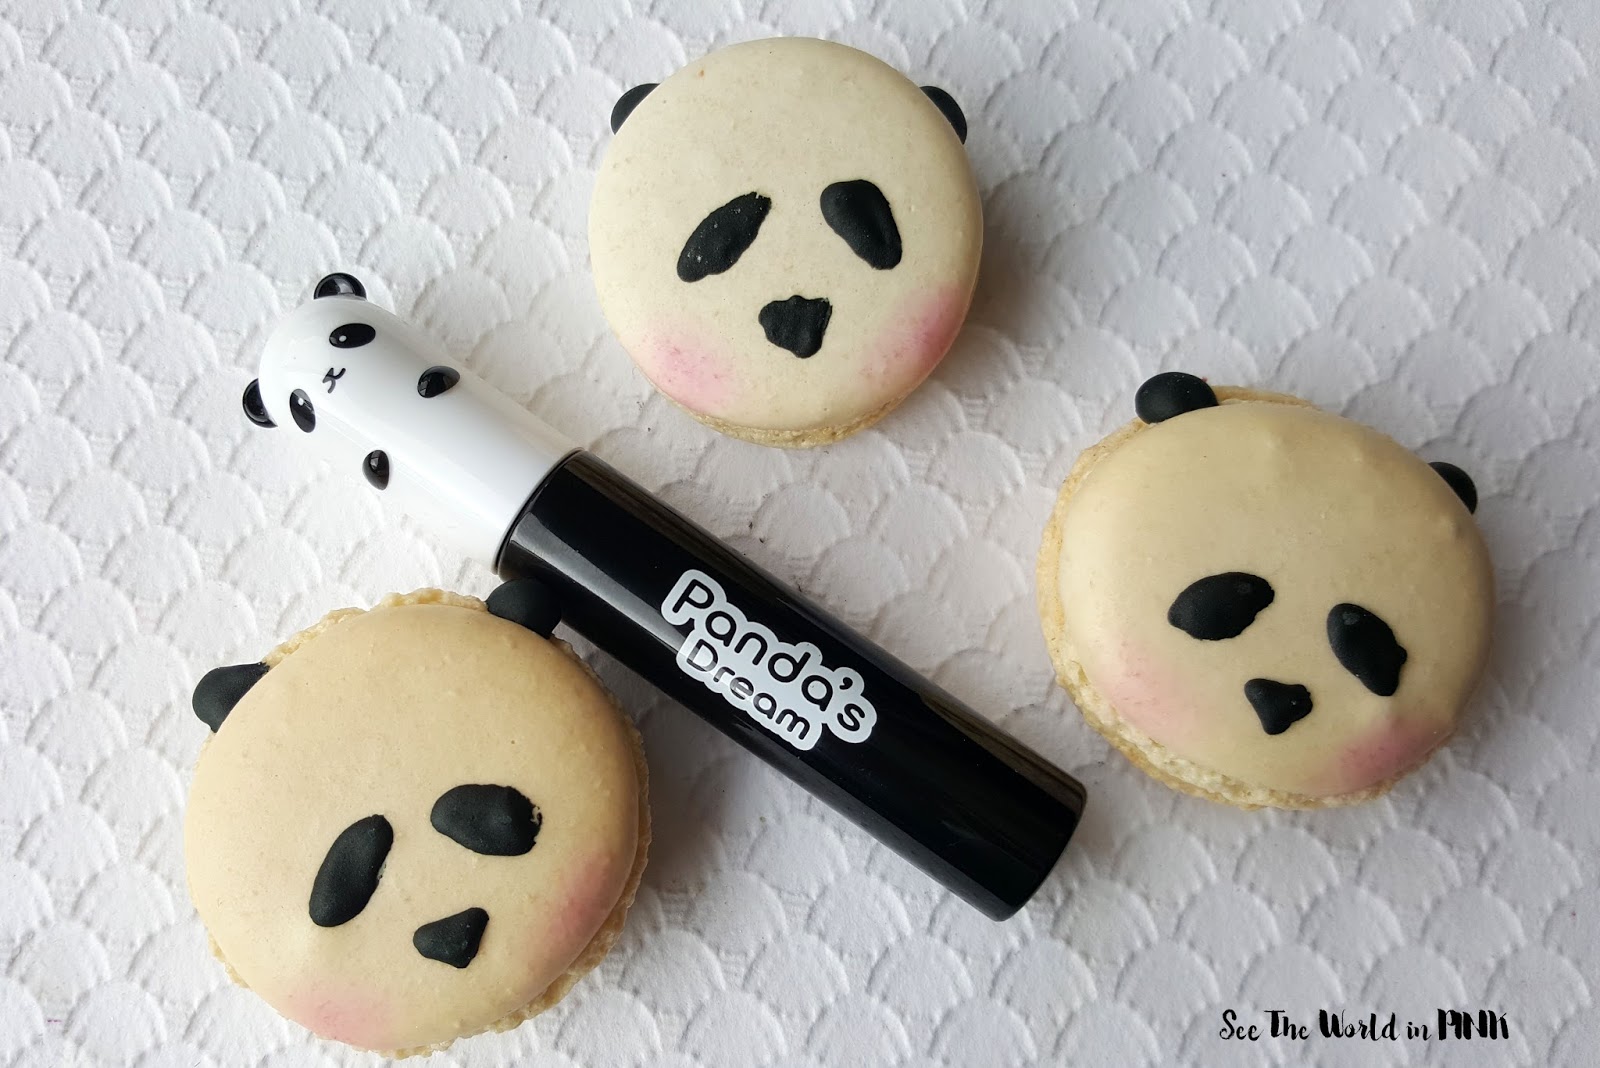 Tony Moly Panda's Dream Smudge Out Mascara Volume - Cutest Mascara Ever, But Does It Work?!